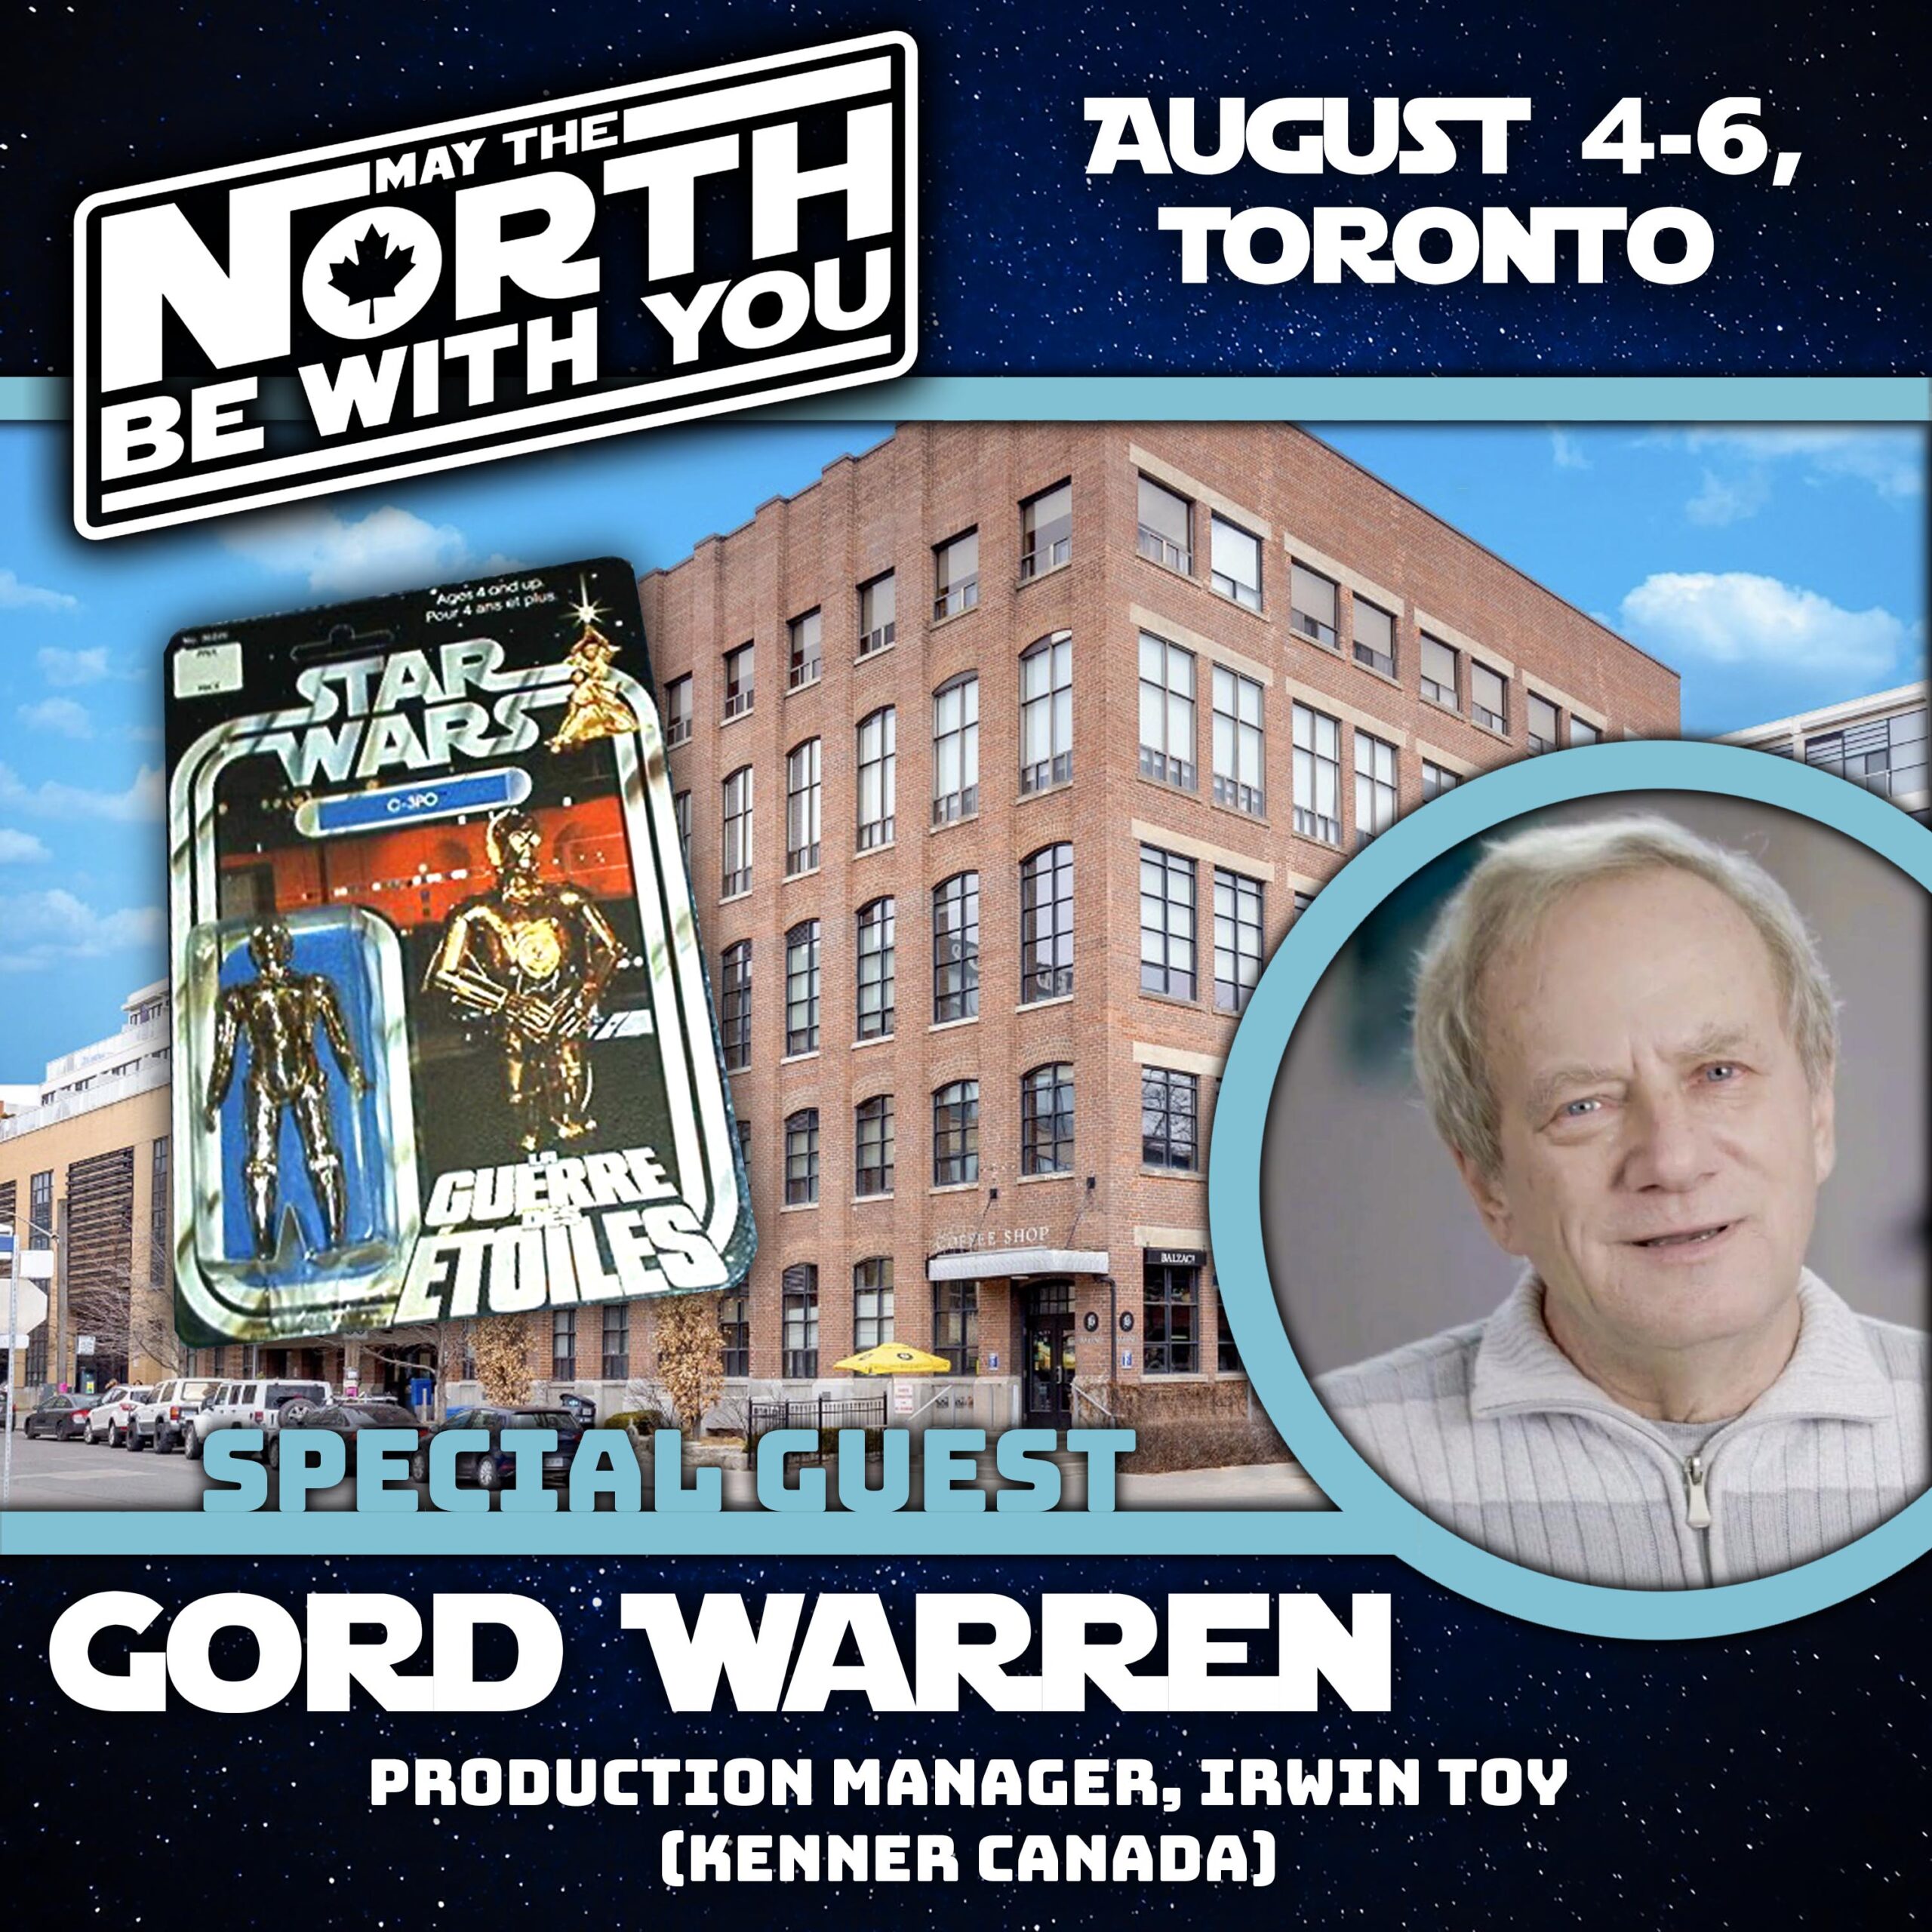 Guest Announcement: Gord Warren, Production Manager, Irwin Toy/Kenner Canada